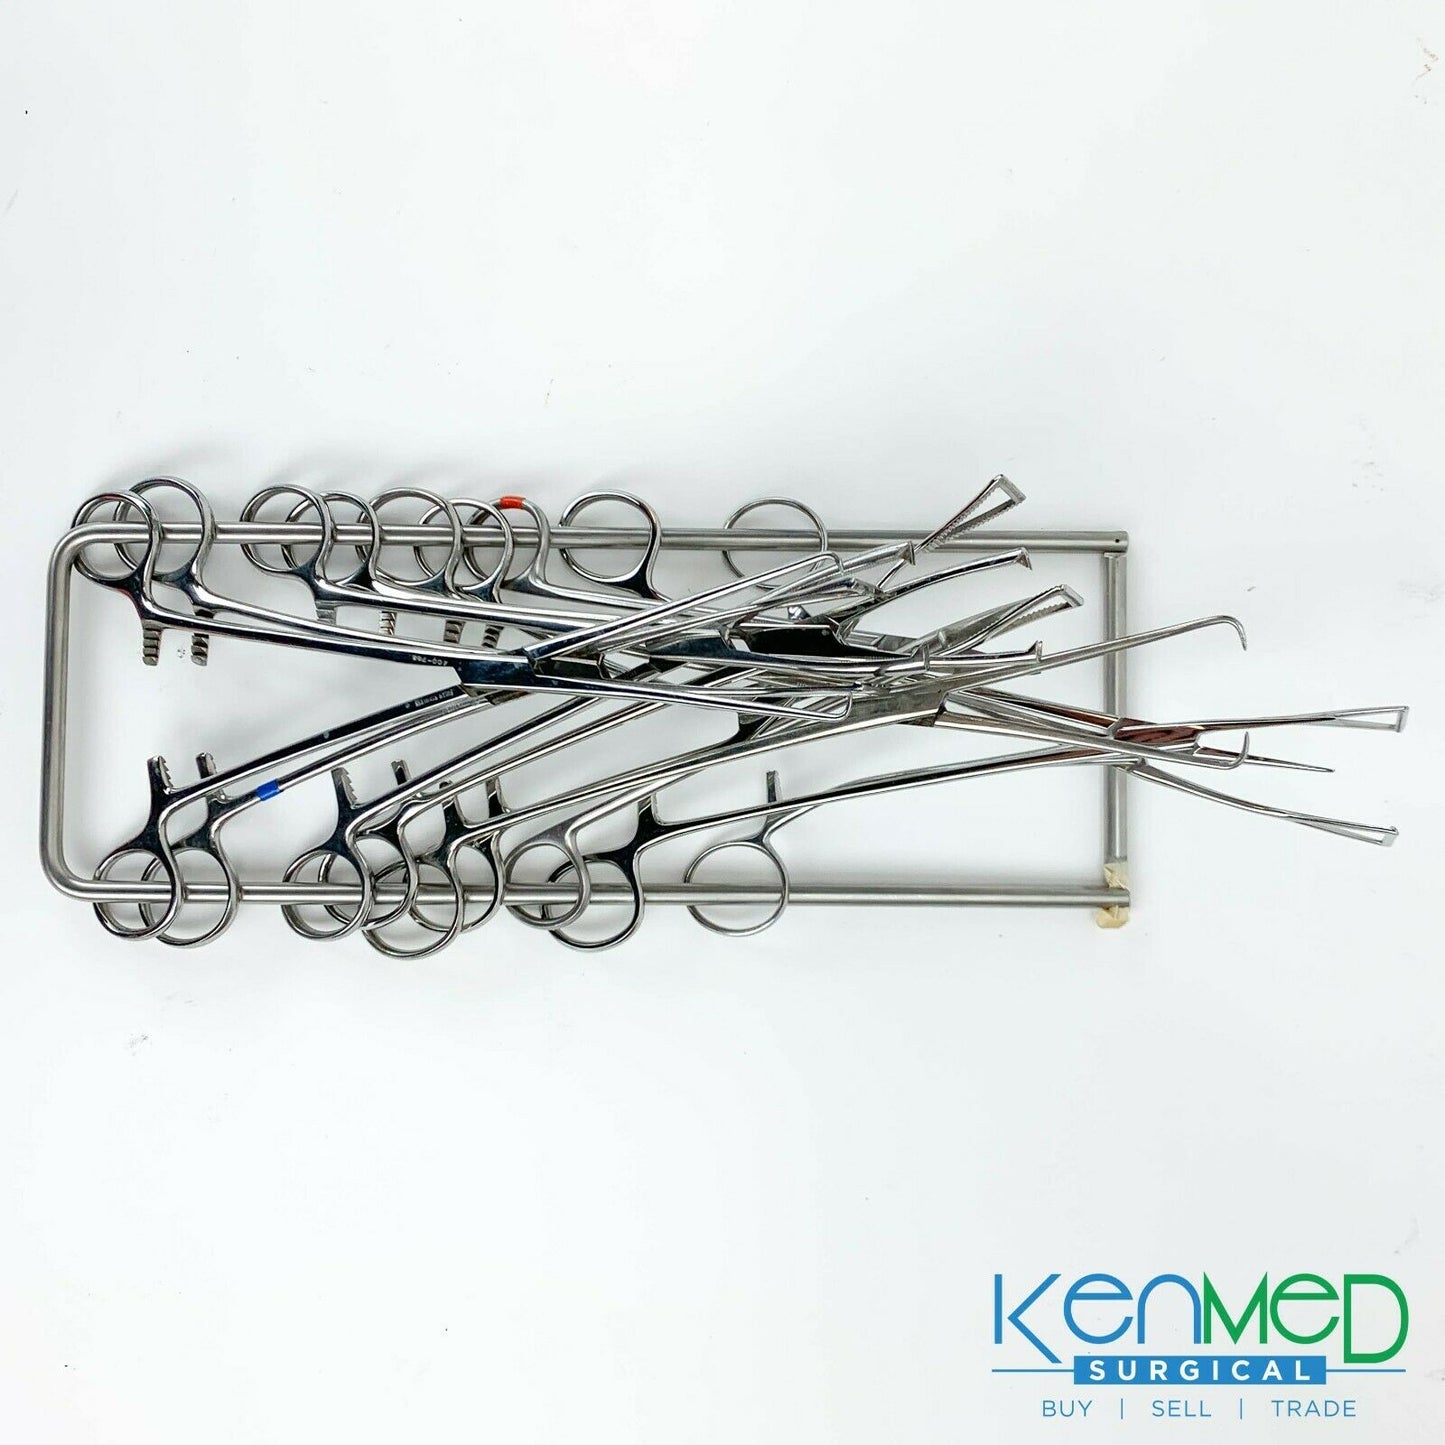 Thoracic Cardiac Clip Applier Instrument Tray - 65 Pieces